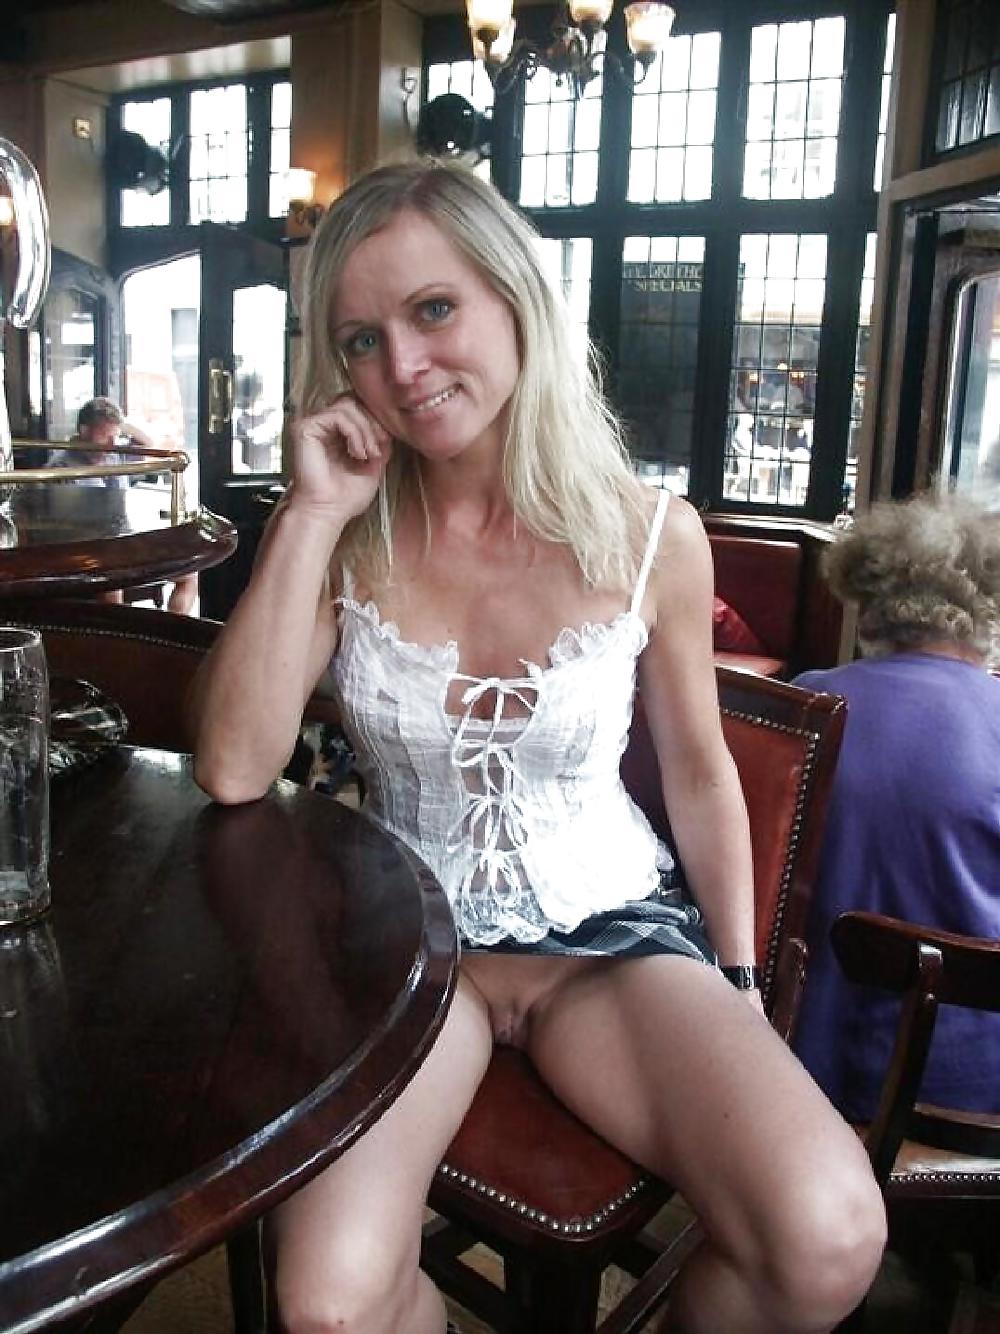 Is she forgot her slip? adult photos